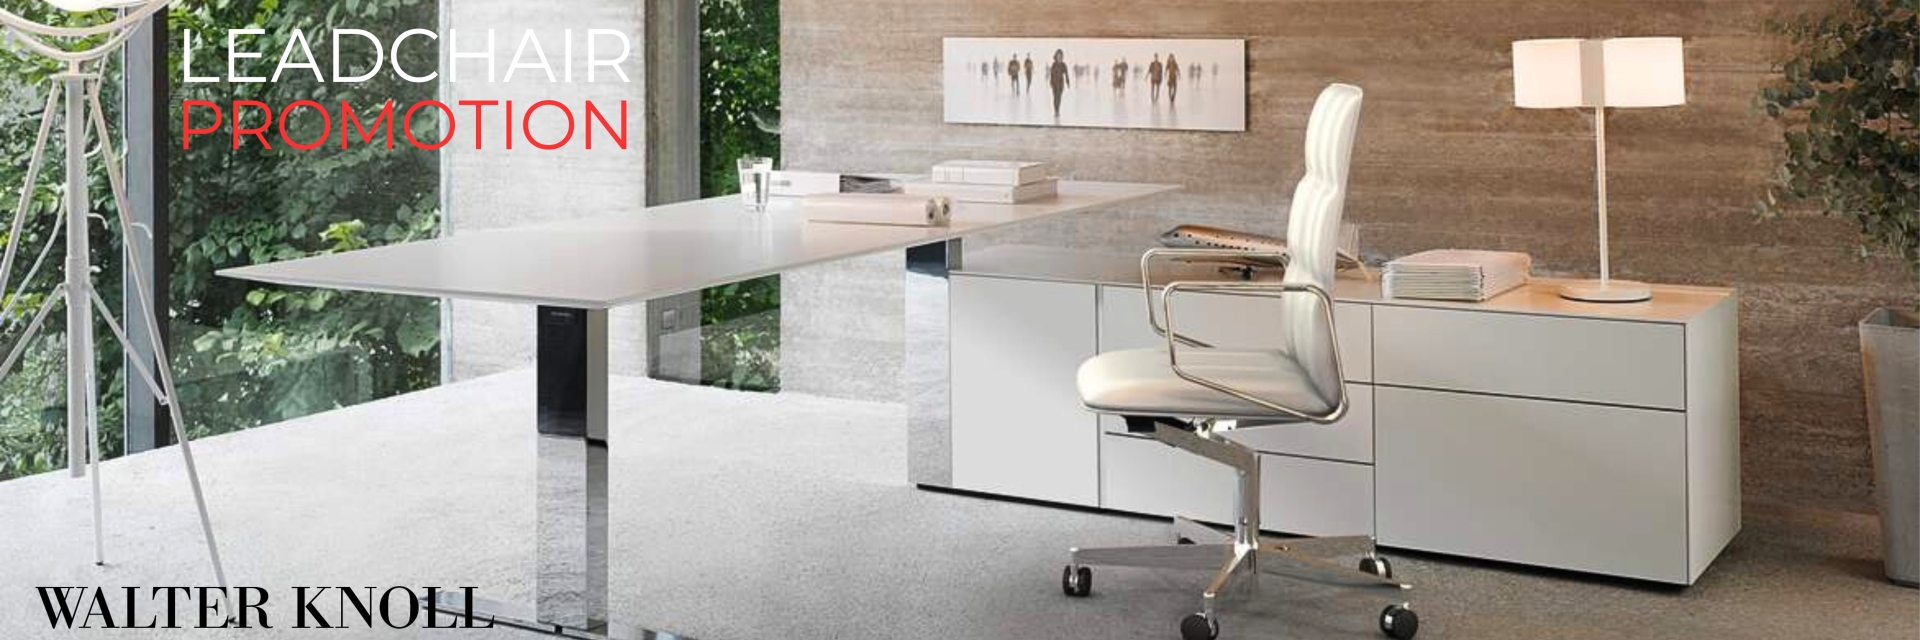 Walter Knoll Leadchair Promotion 2023